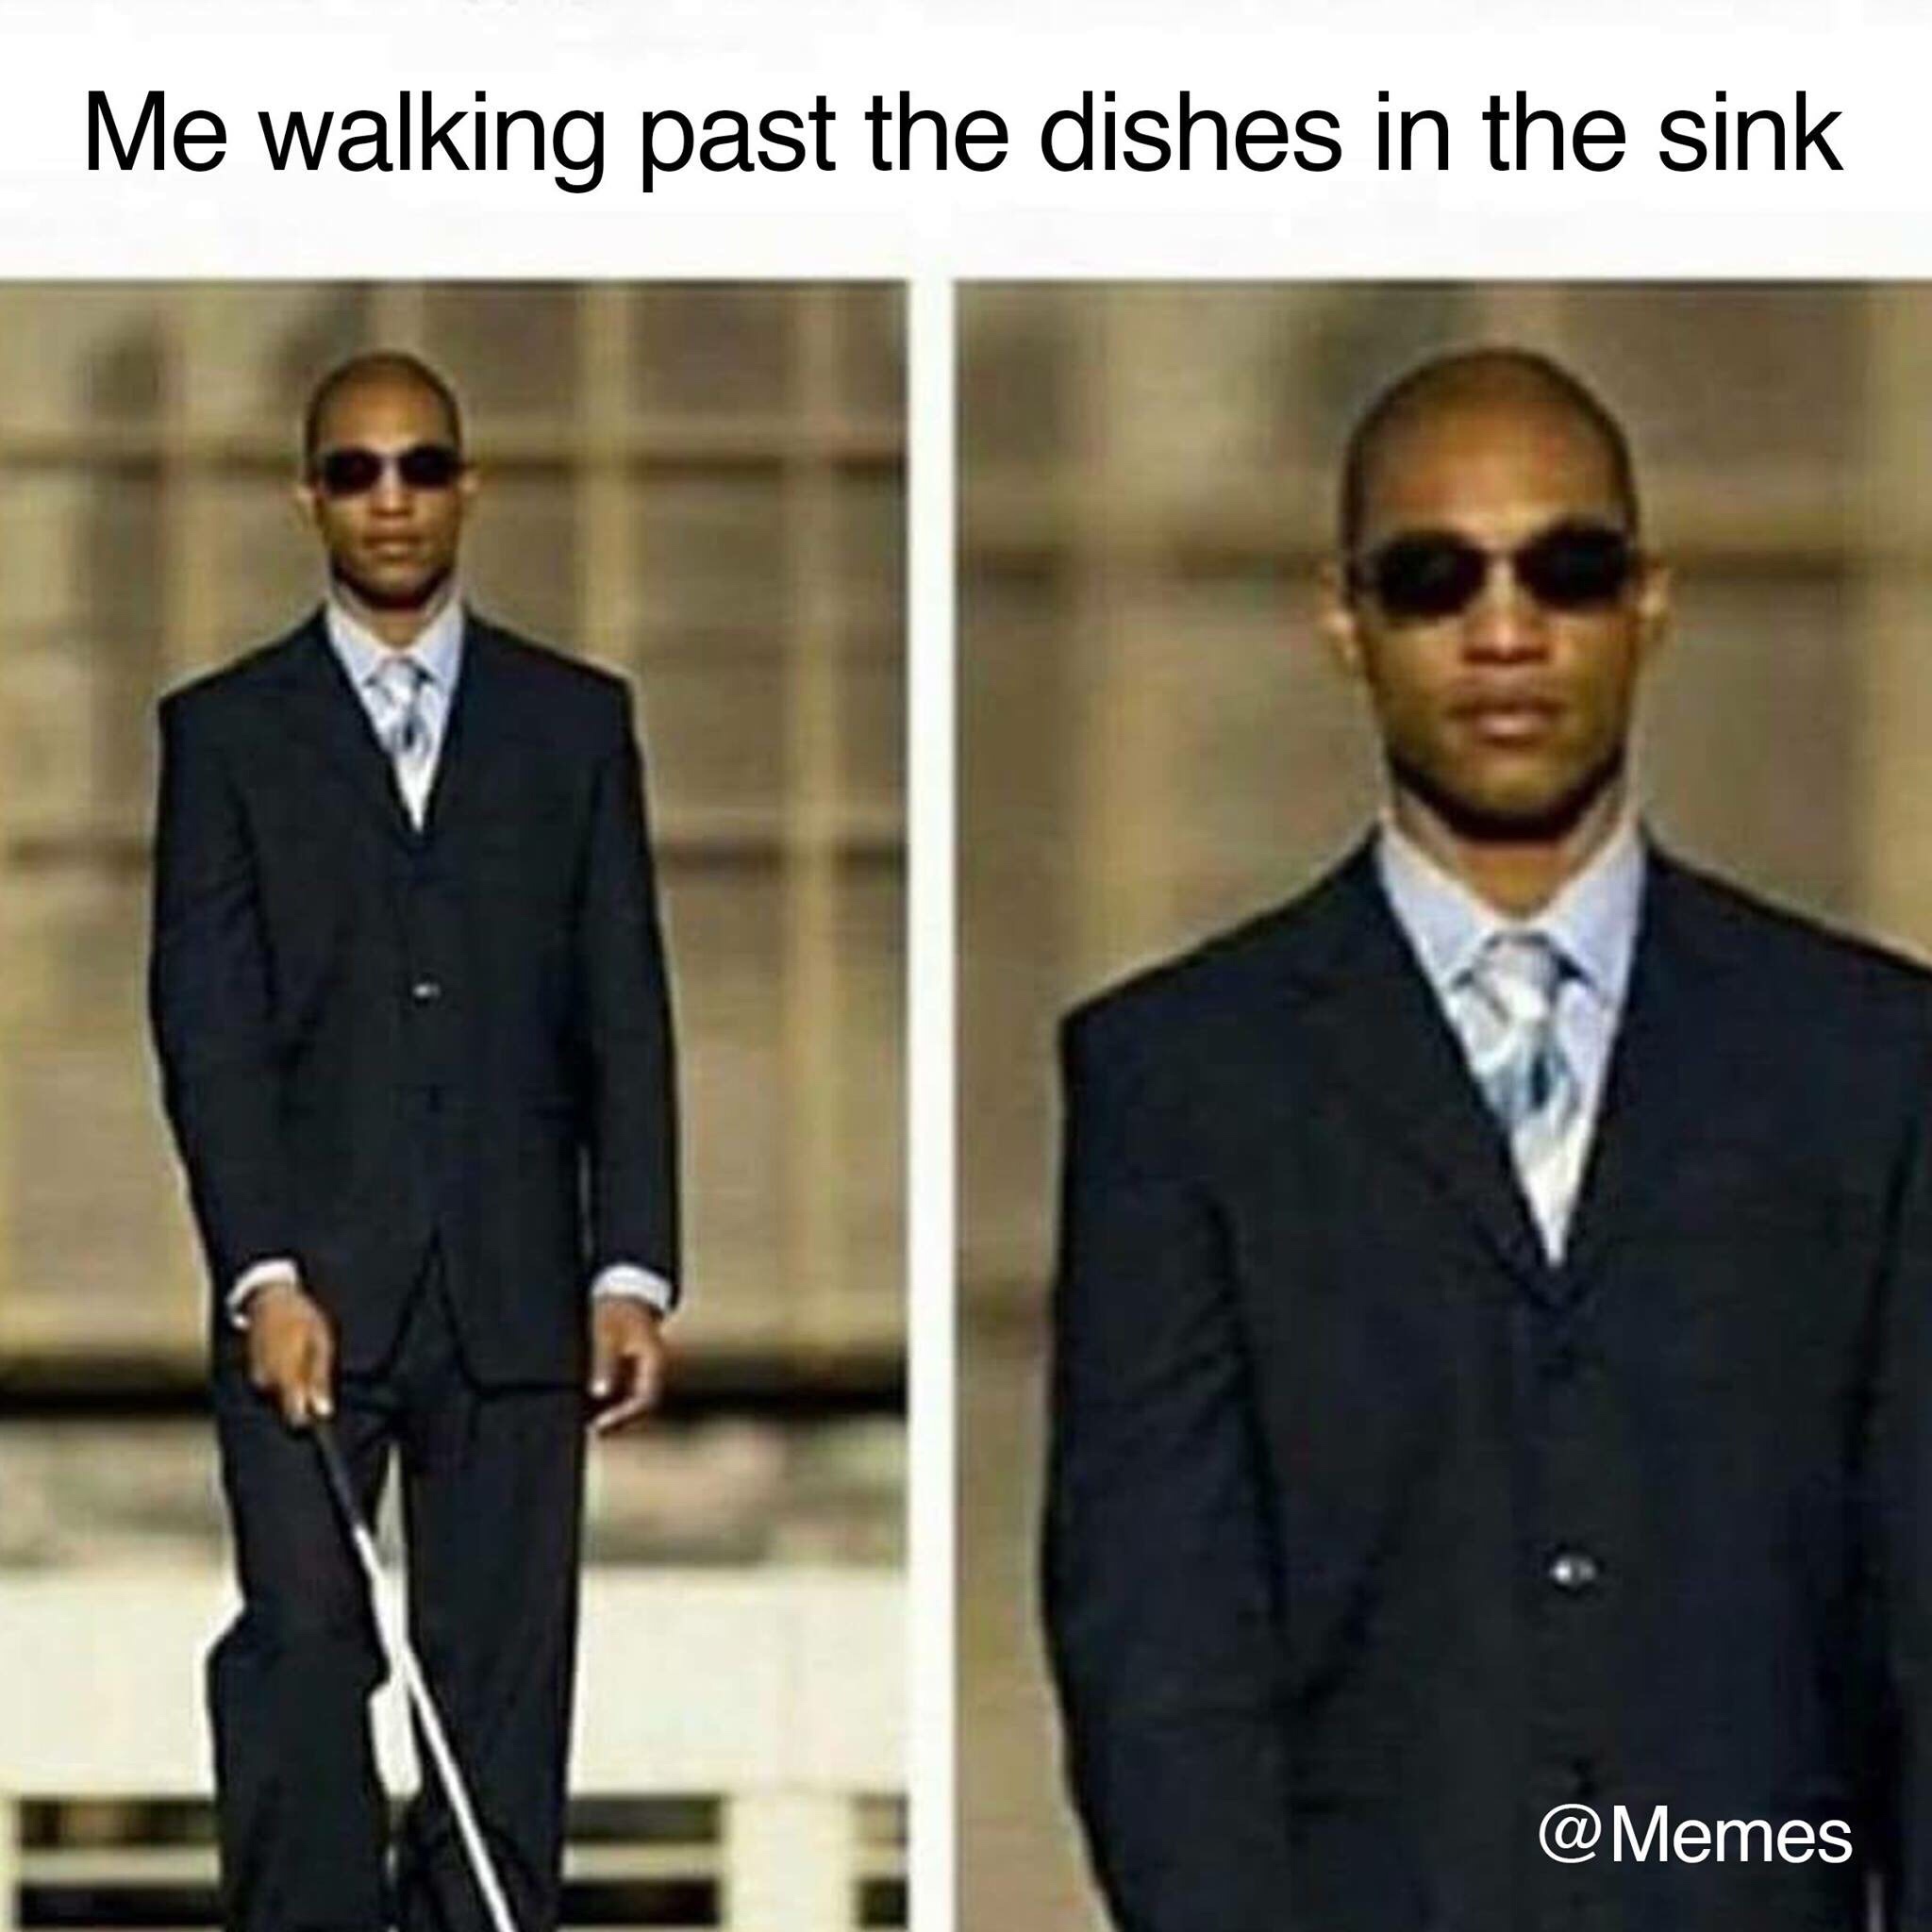 dishes in the sink meme - Me walking past the dishes in the sink